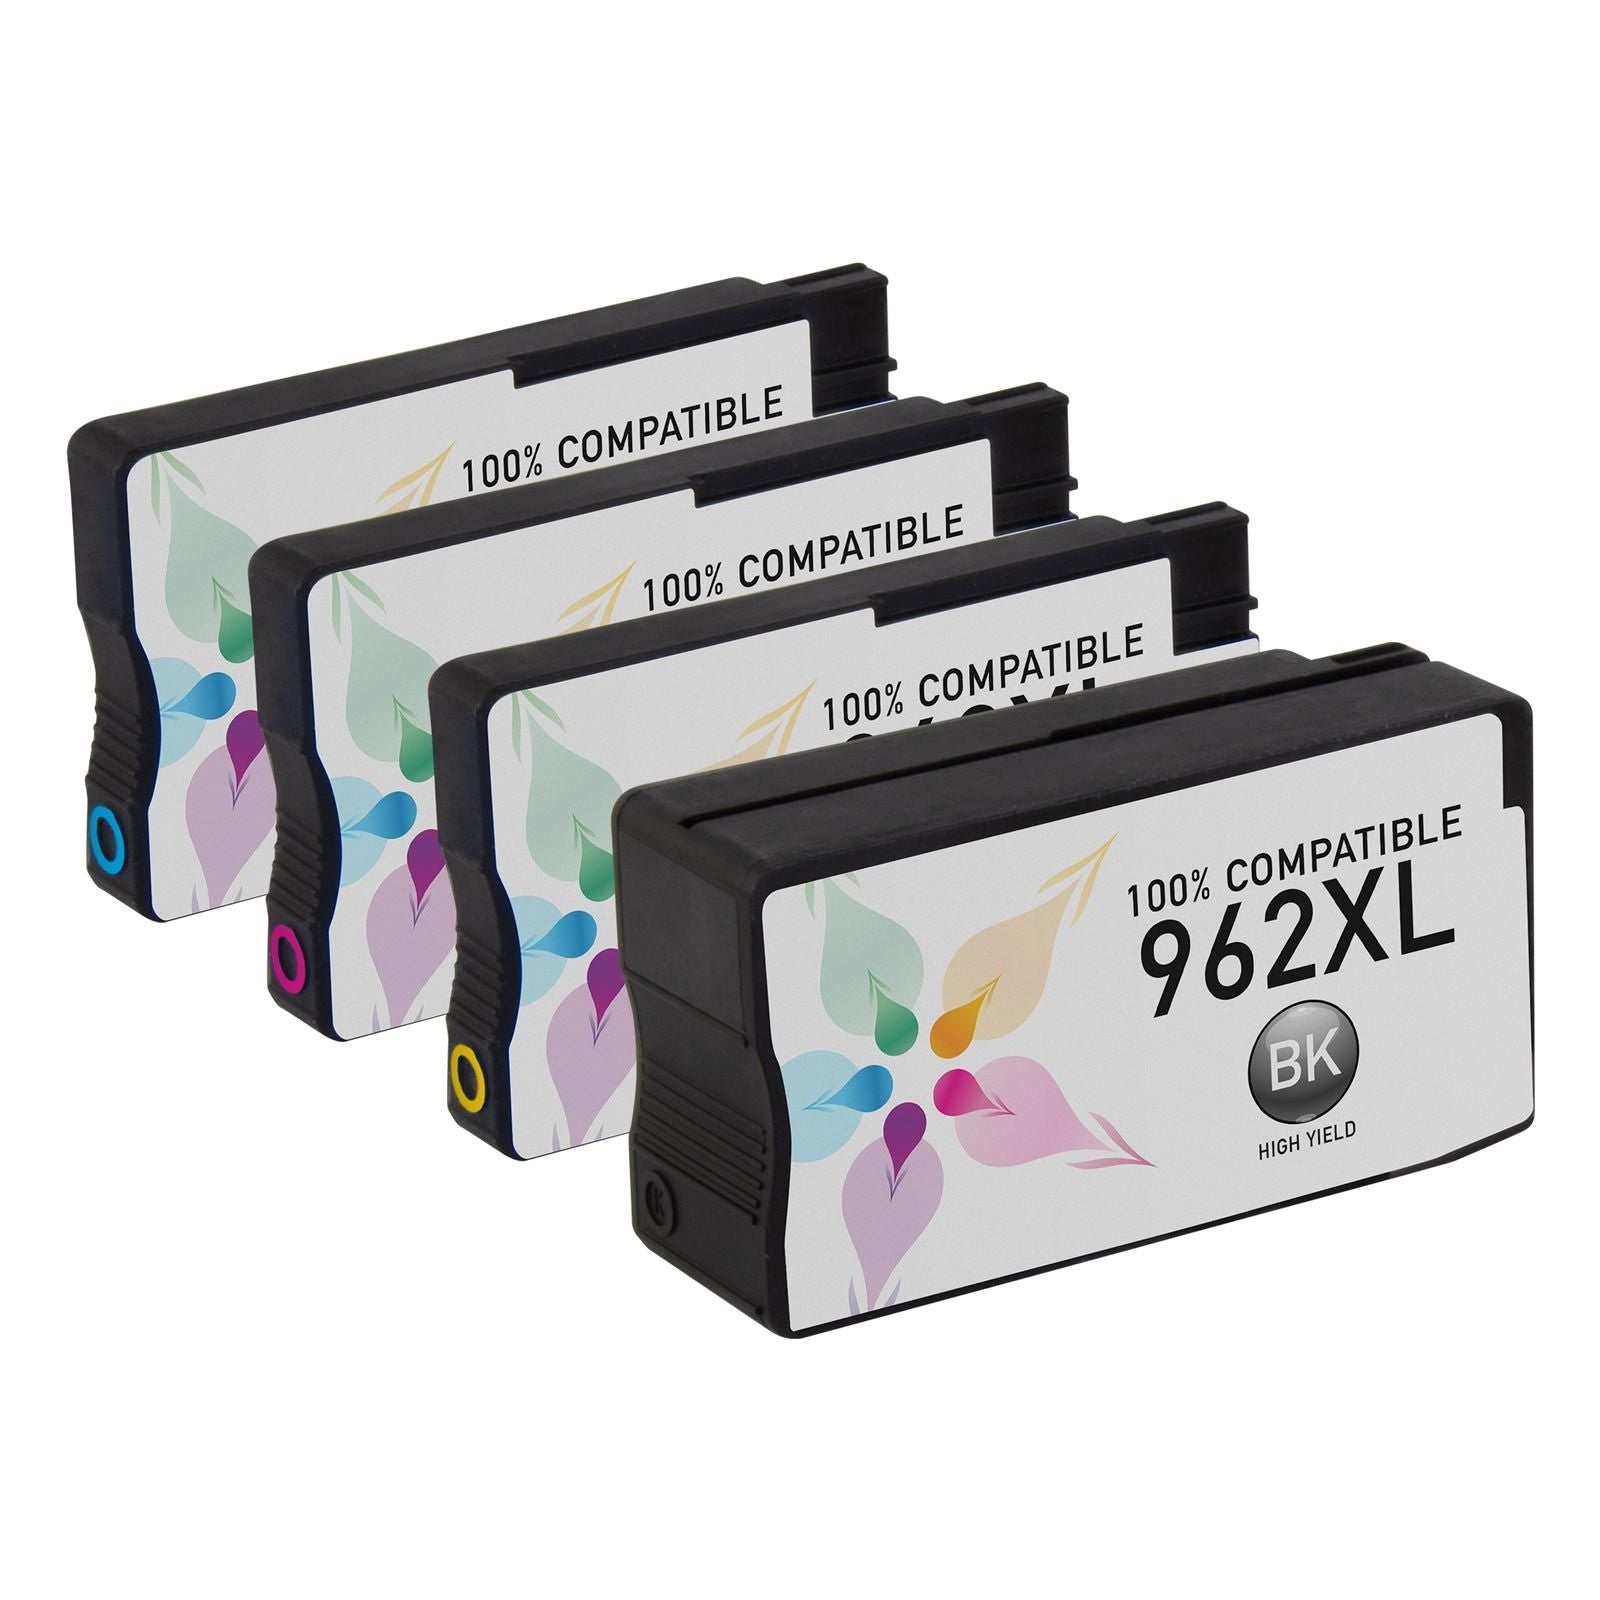 IMPERIAL BRAND Compatible Set of 4 High Yield Ink Cartridges for HP 962XL